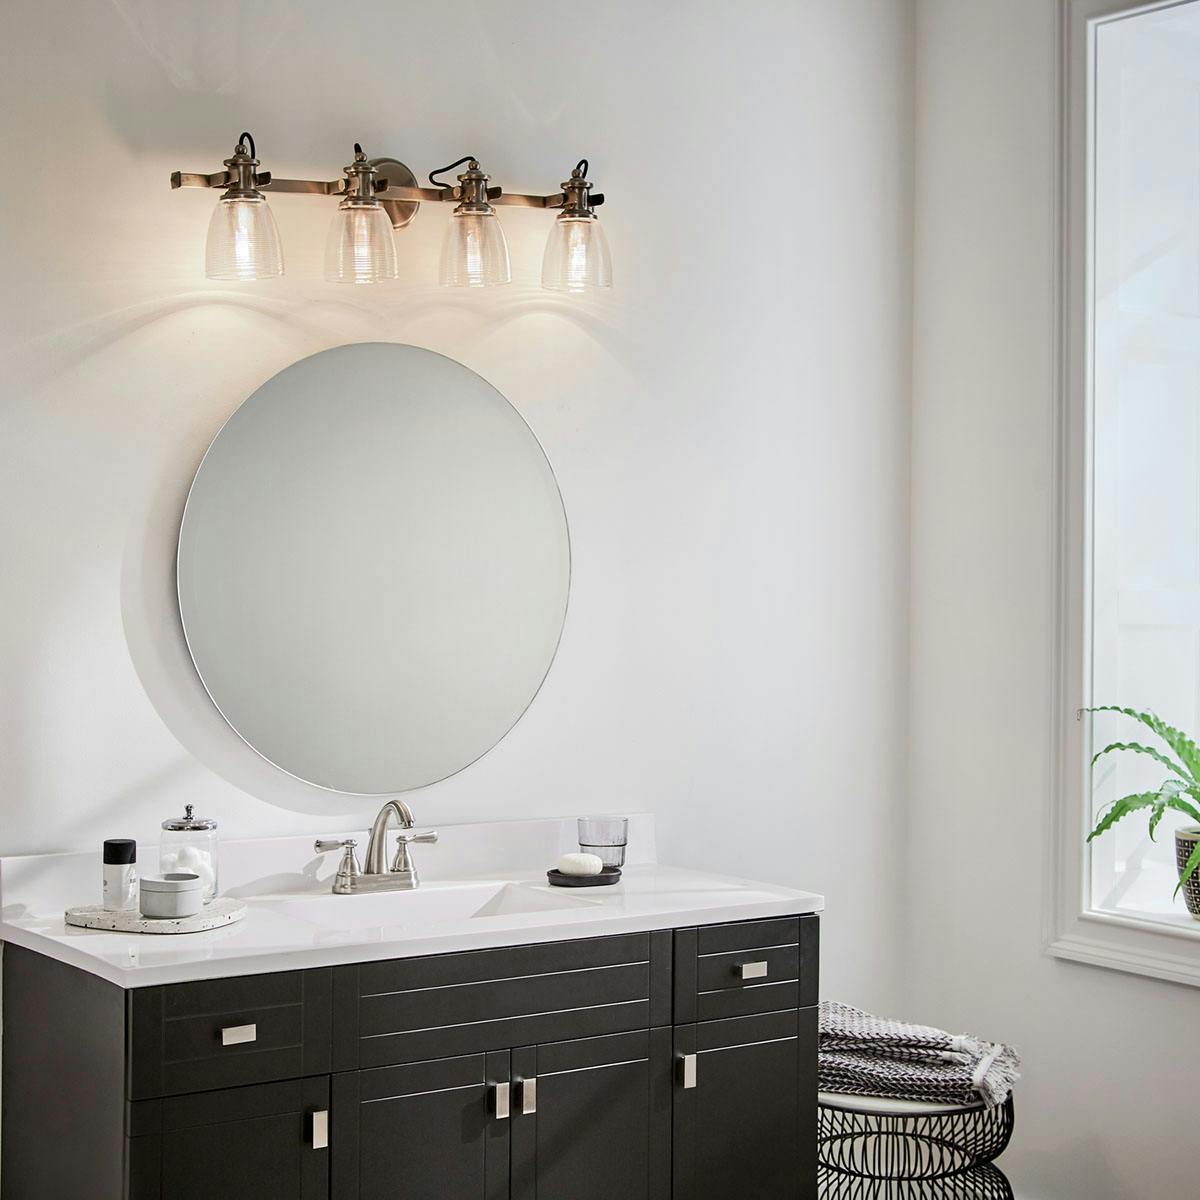 Day time Bathroom featuring Flagship vanity light 45874CLP